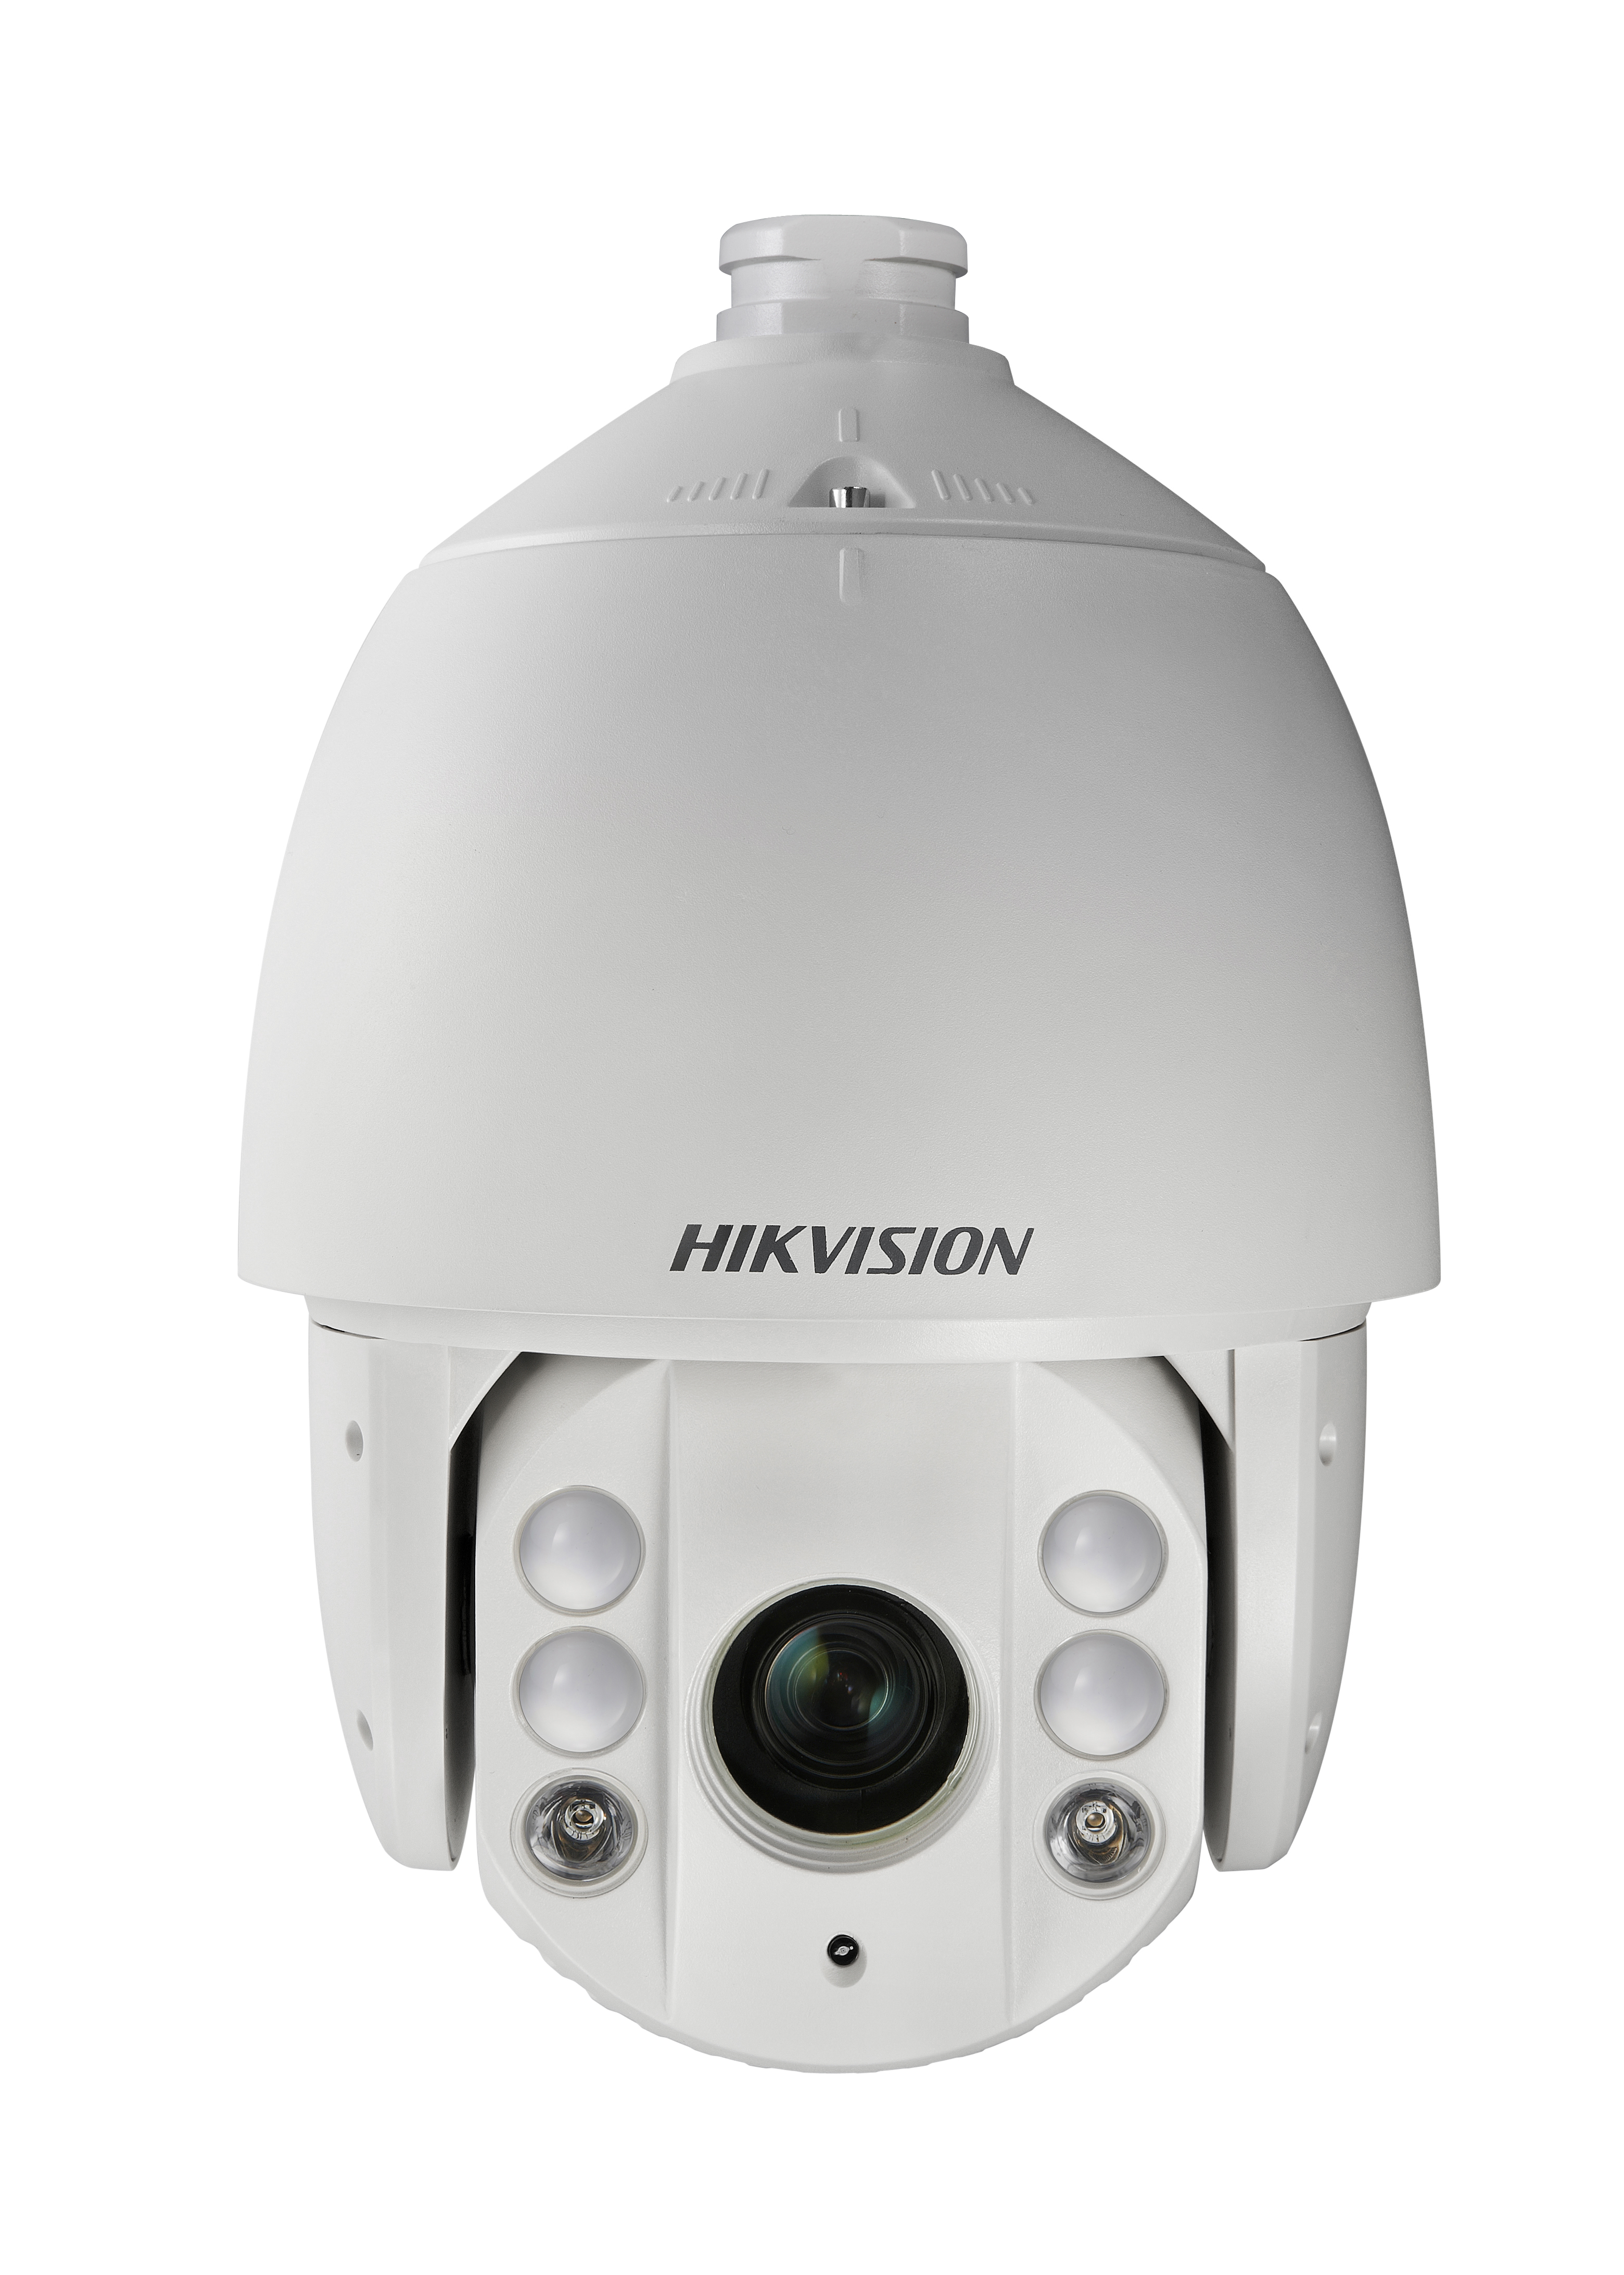 Hikvision DS-2AE7232TI-A